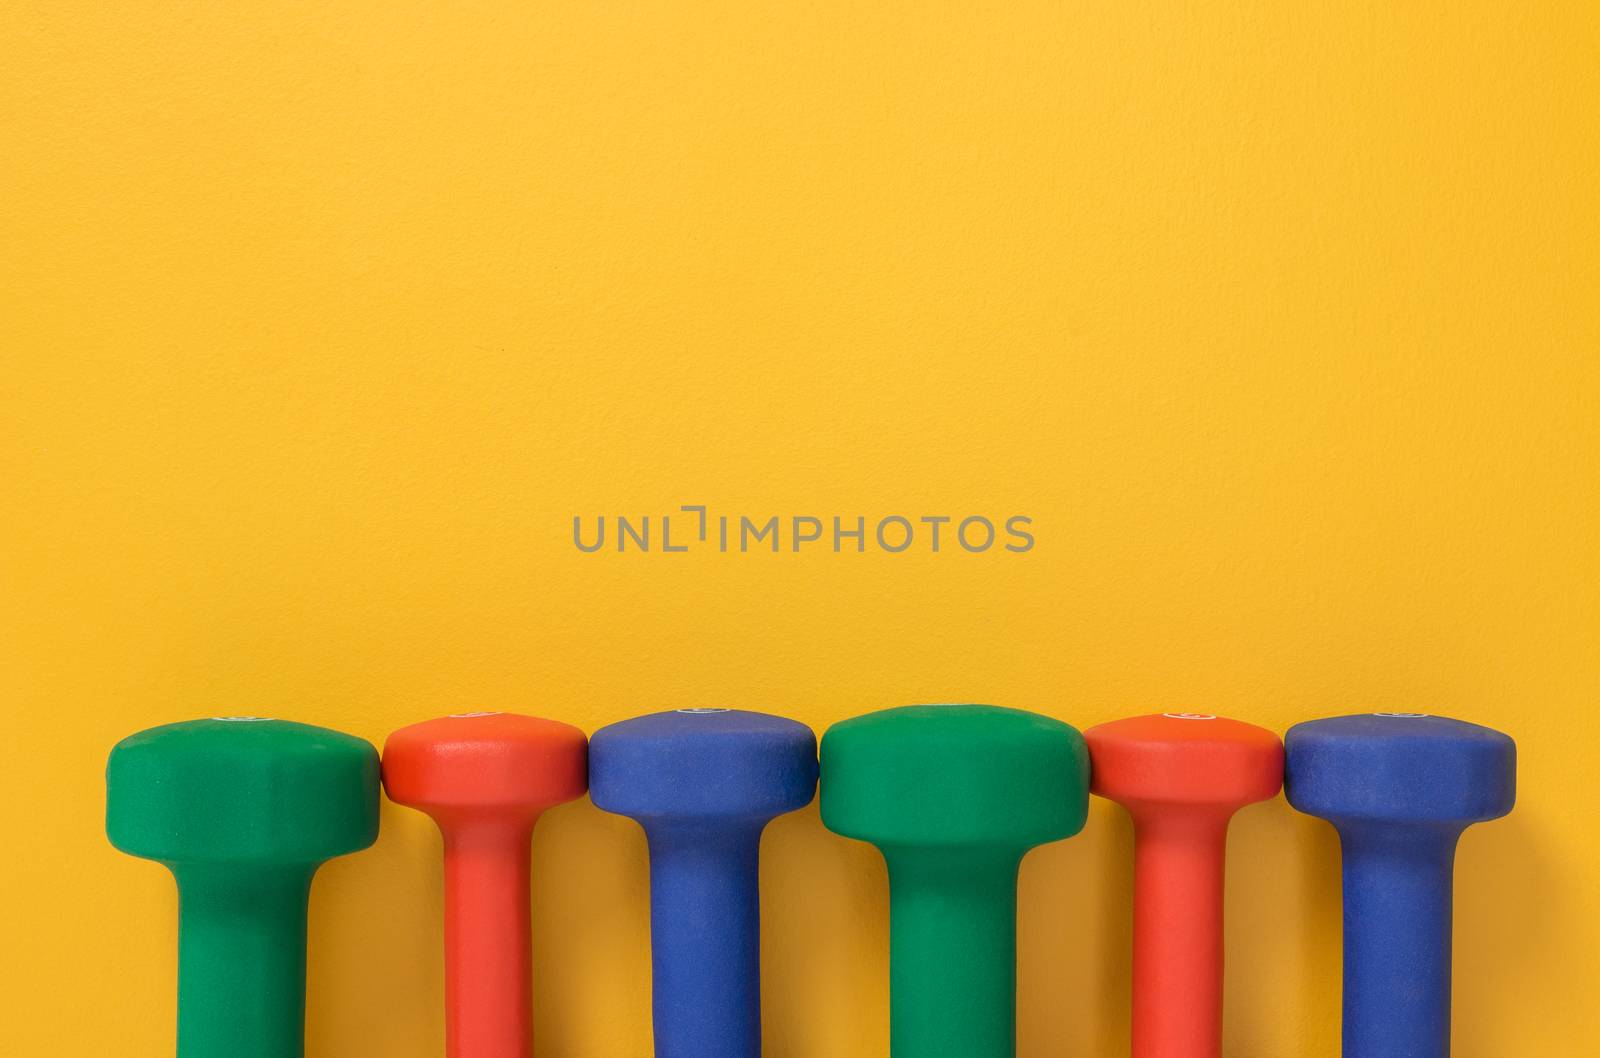 Multicolored dumbbells on bright yellow background by anikasalsera